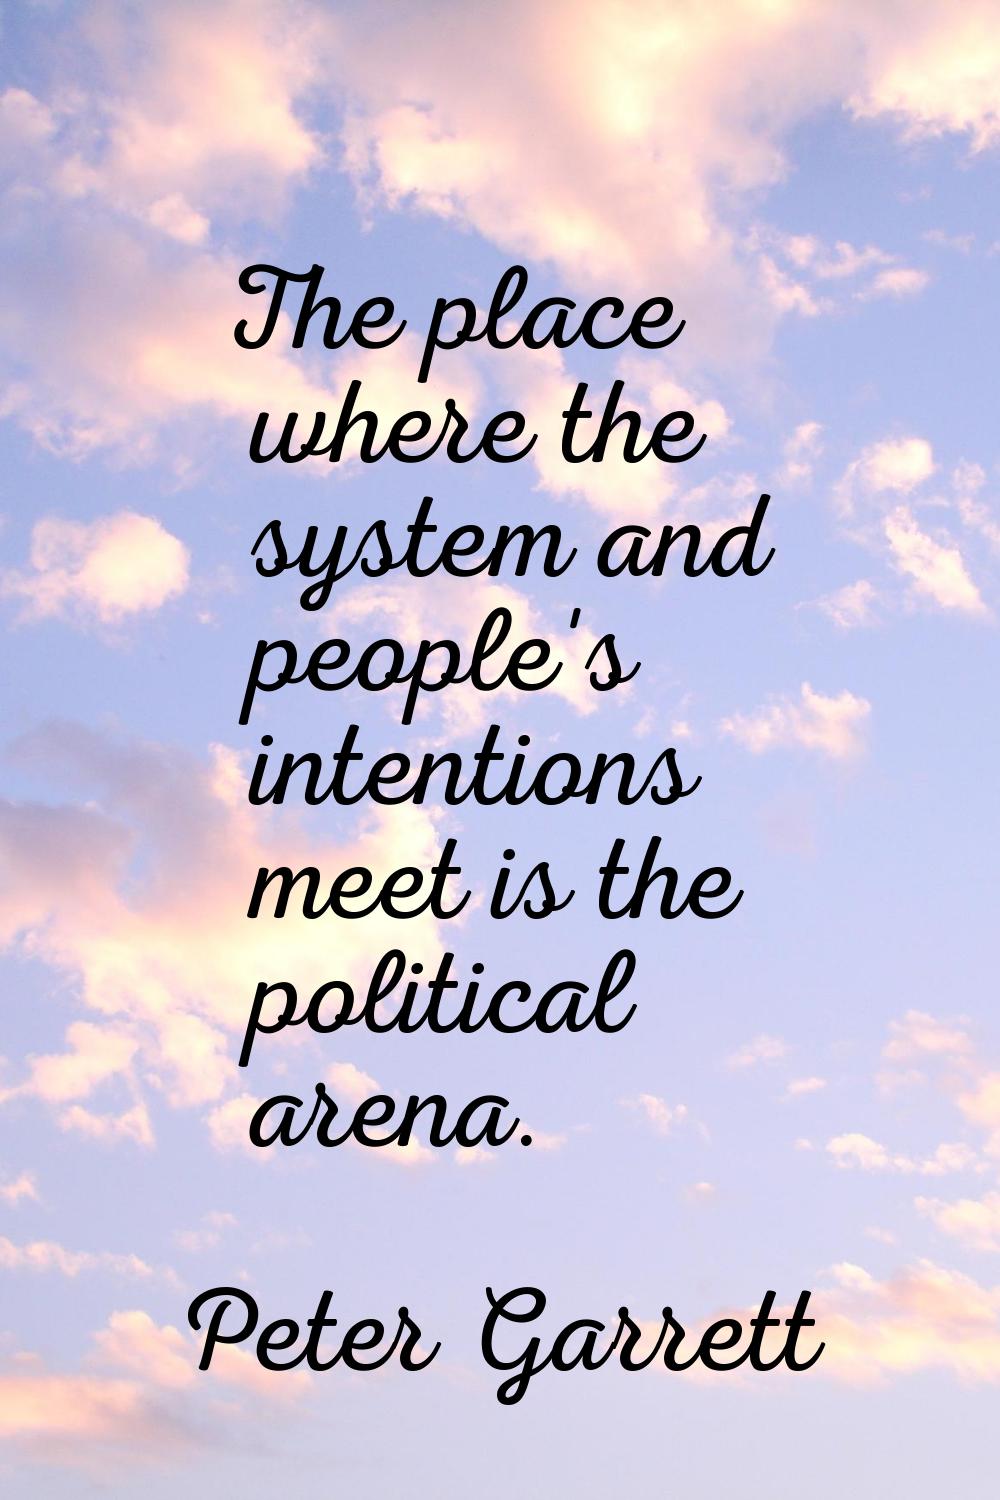 The place where the system and people's intentions meet is the political arena.